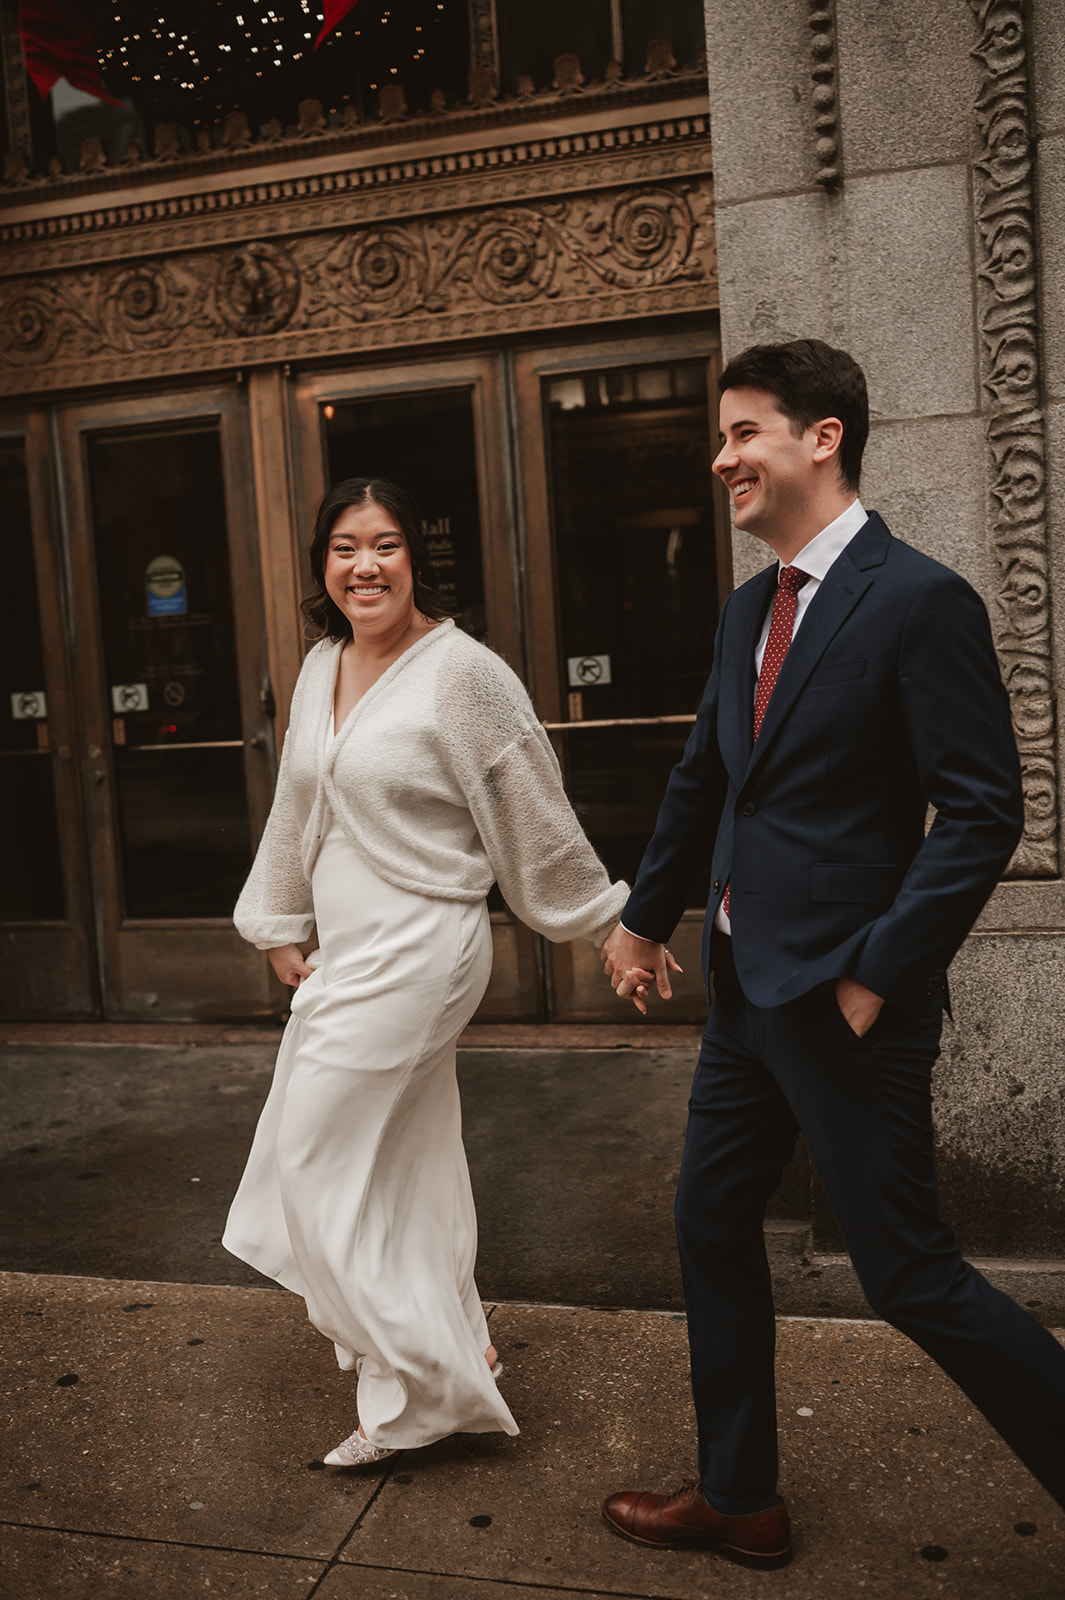 Intimate rainy day Chicago elopement wedding photography - Walking in